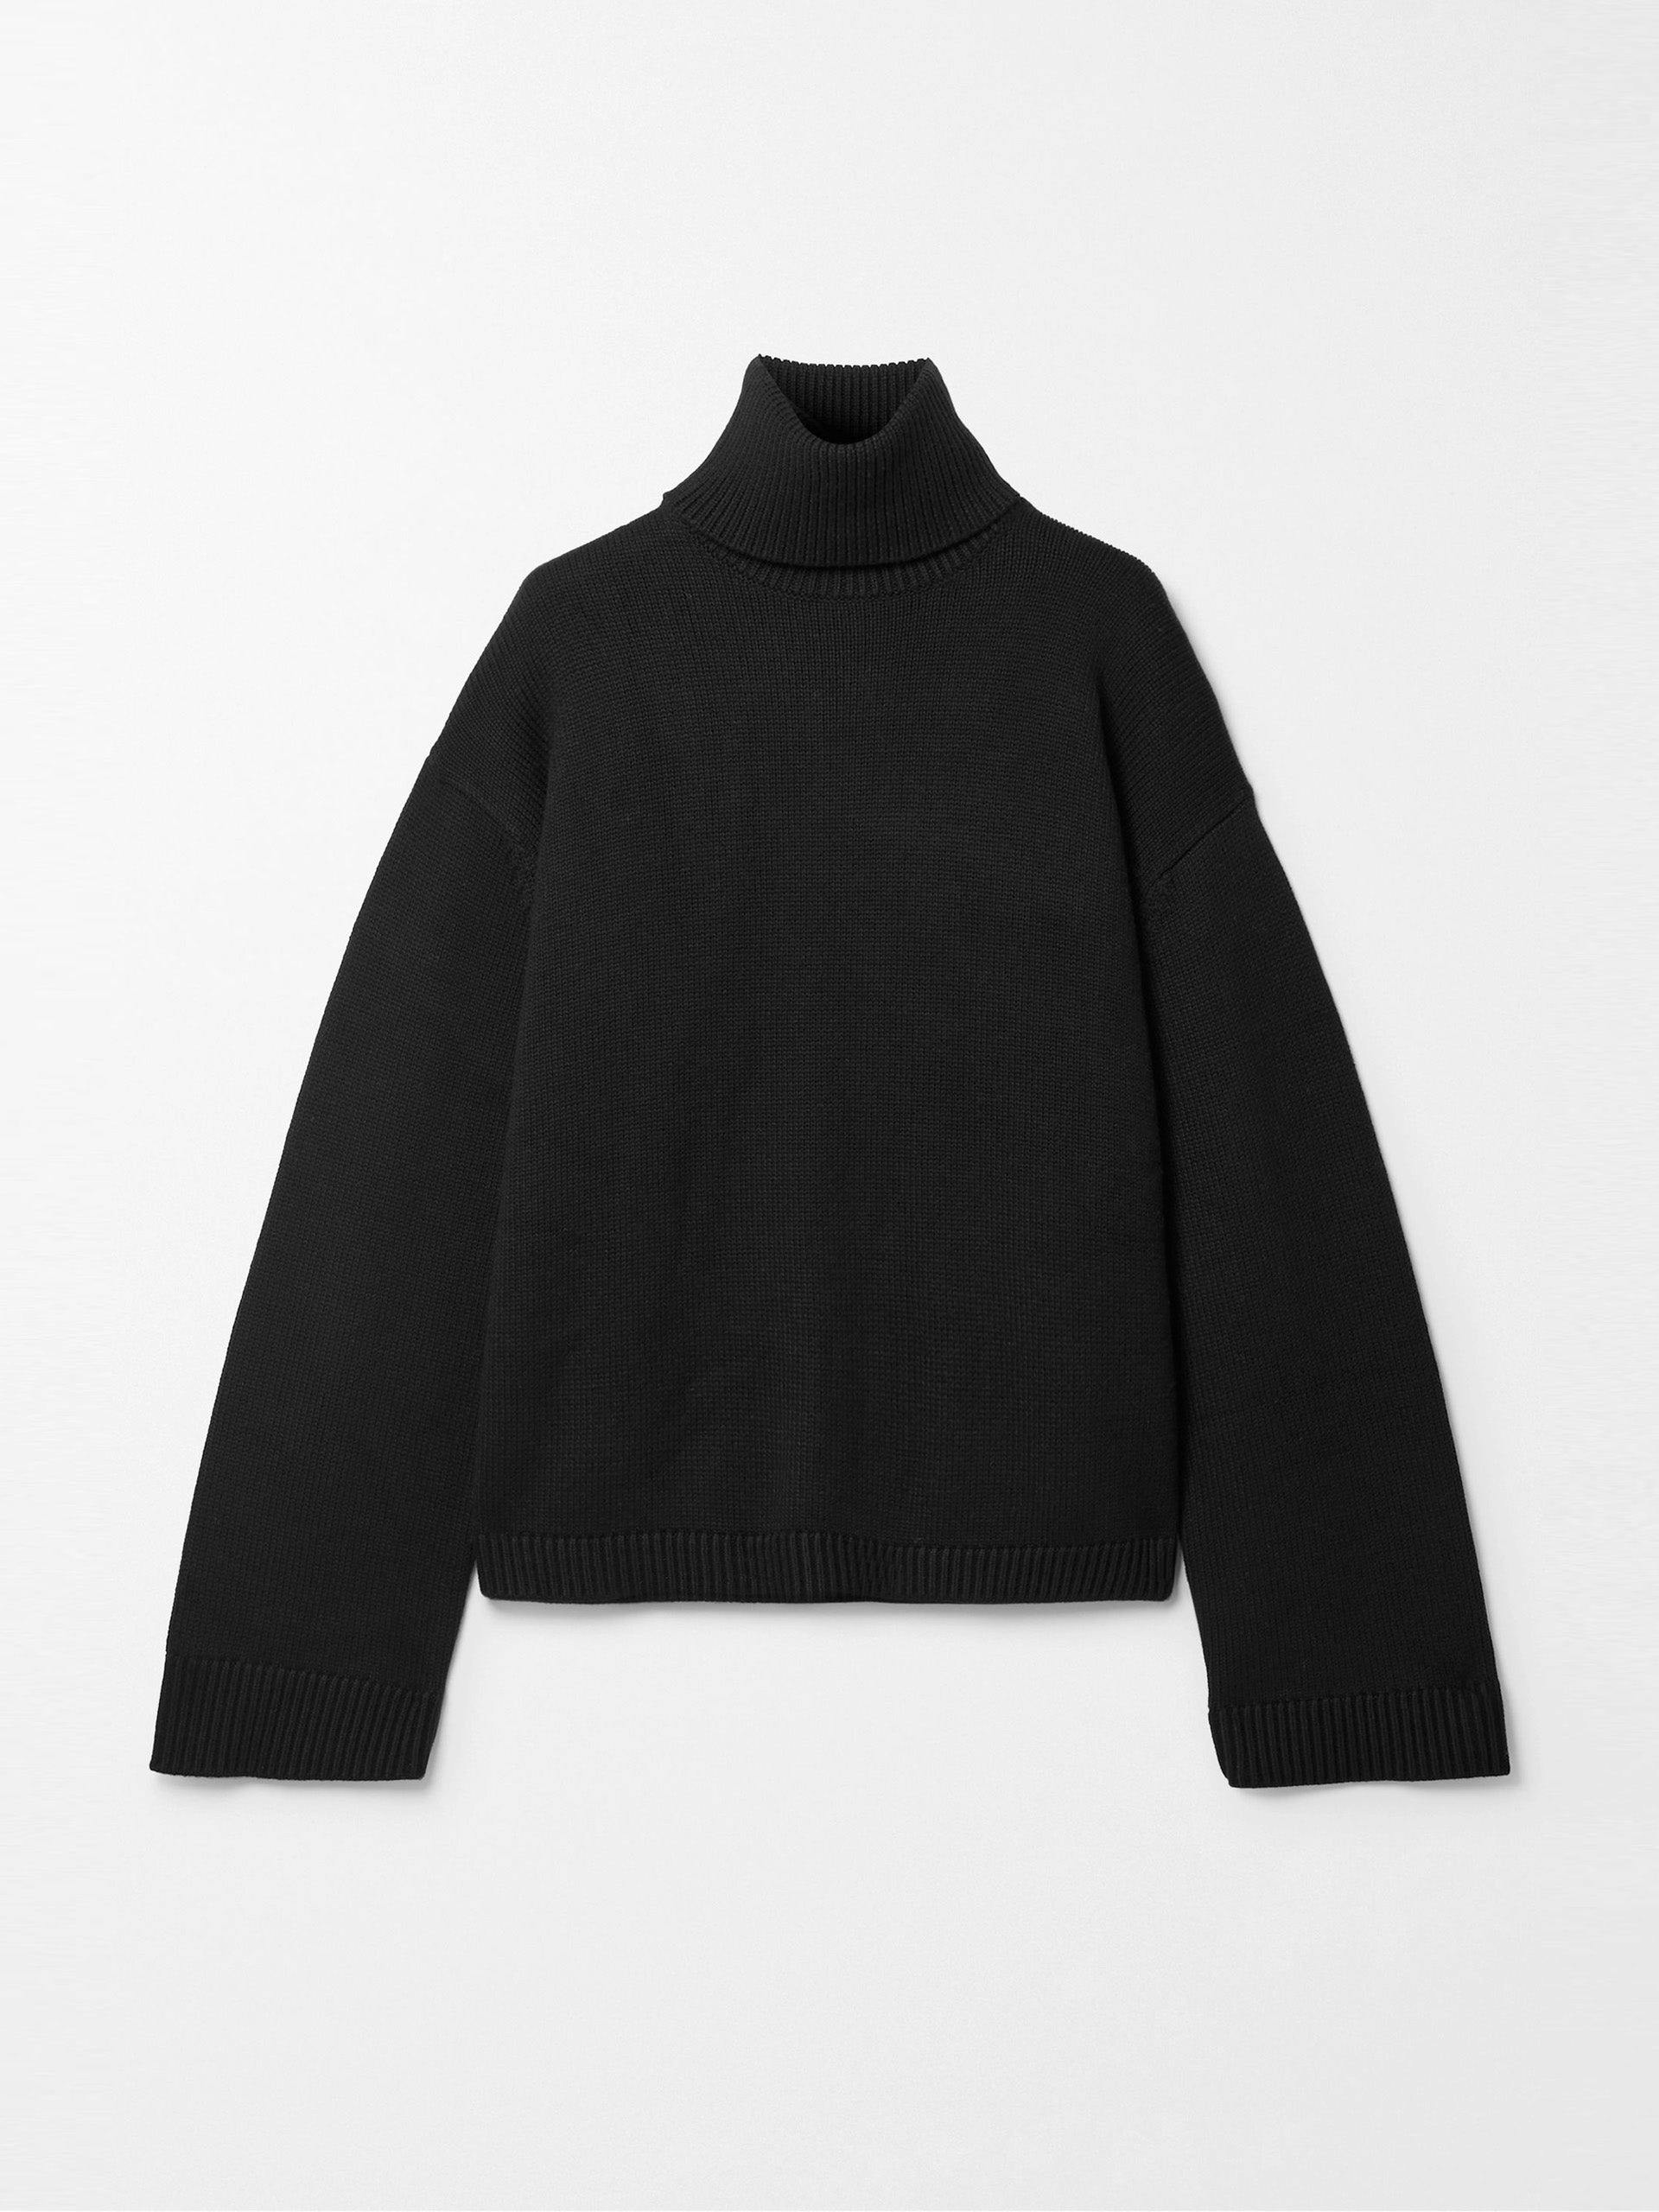 Black wool and cotton-blend turtleneck sweater